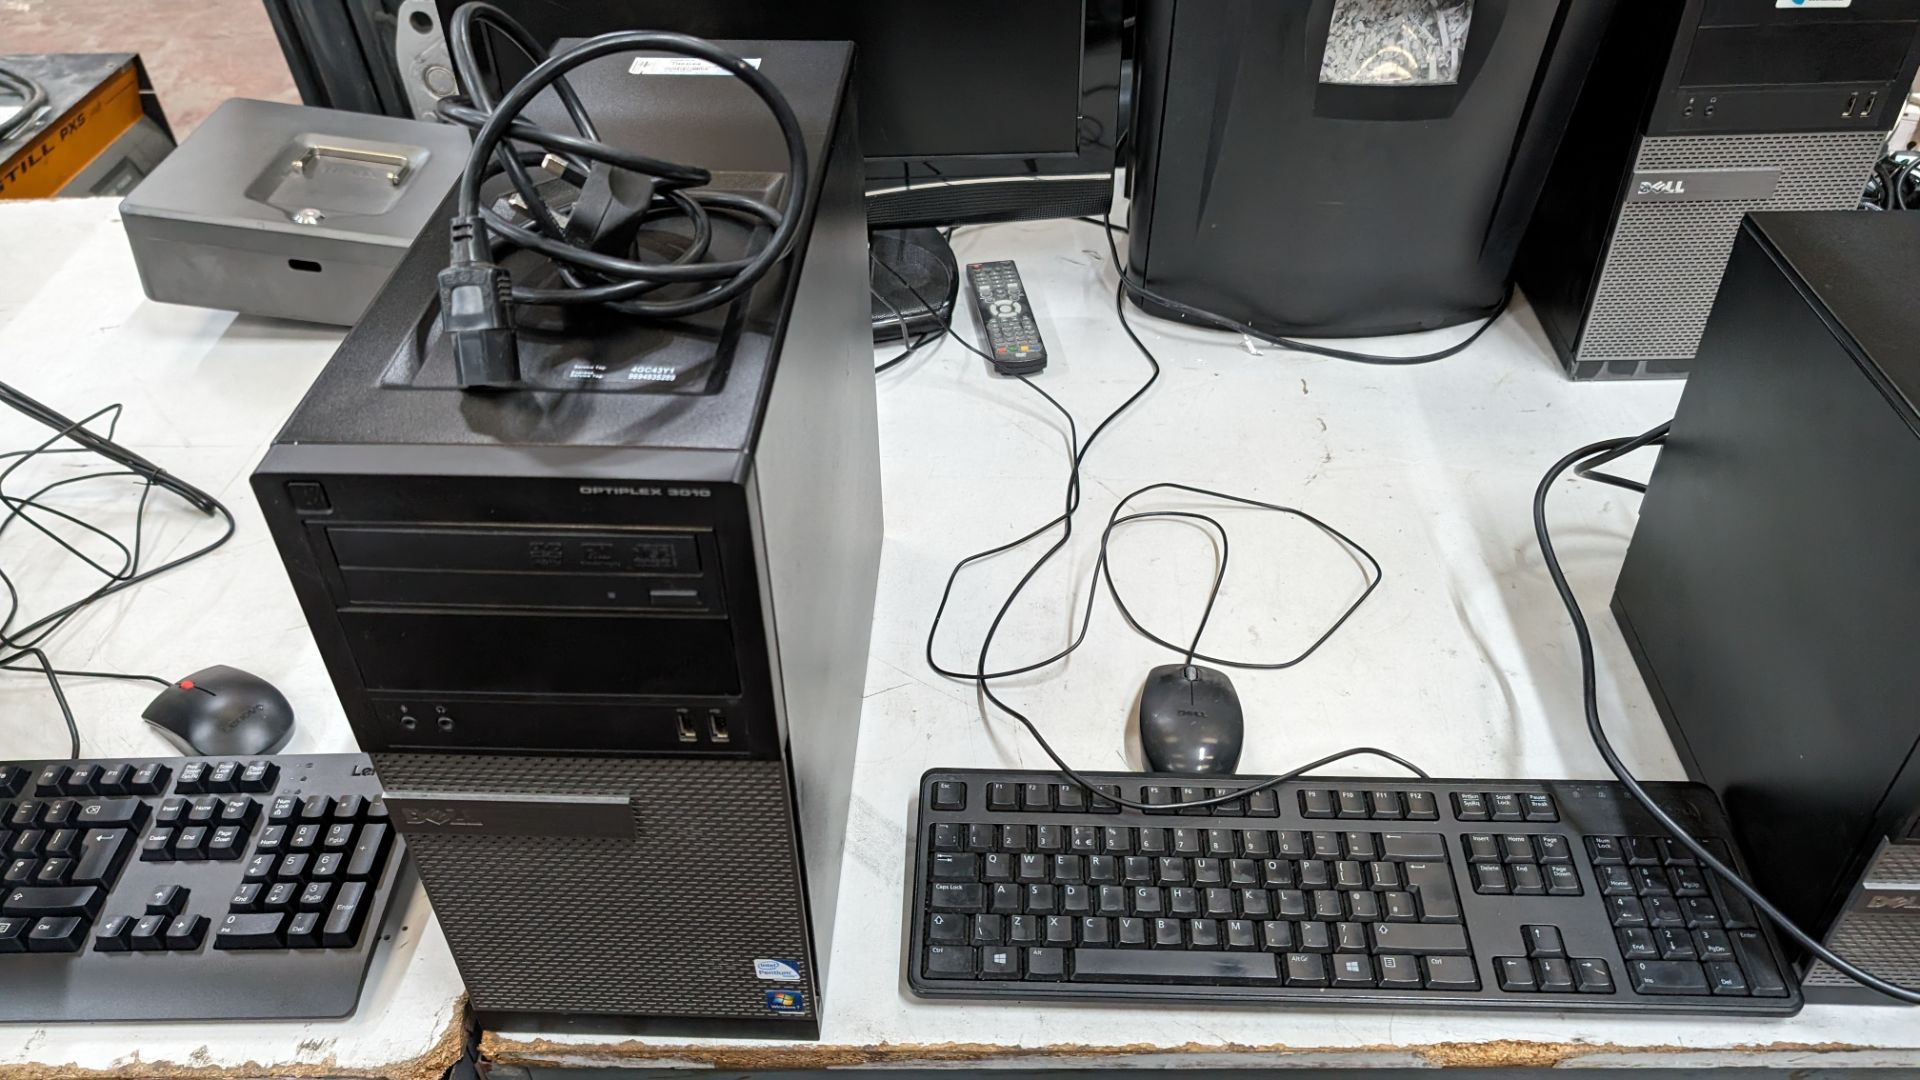 3 off desktop computers each including keyboard and mouse - Image 7 of 10